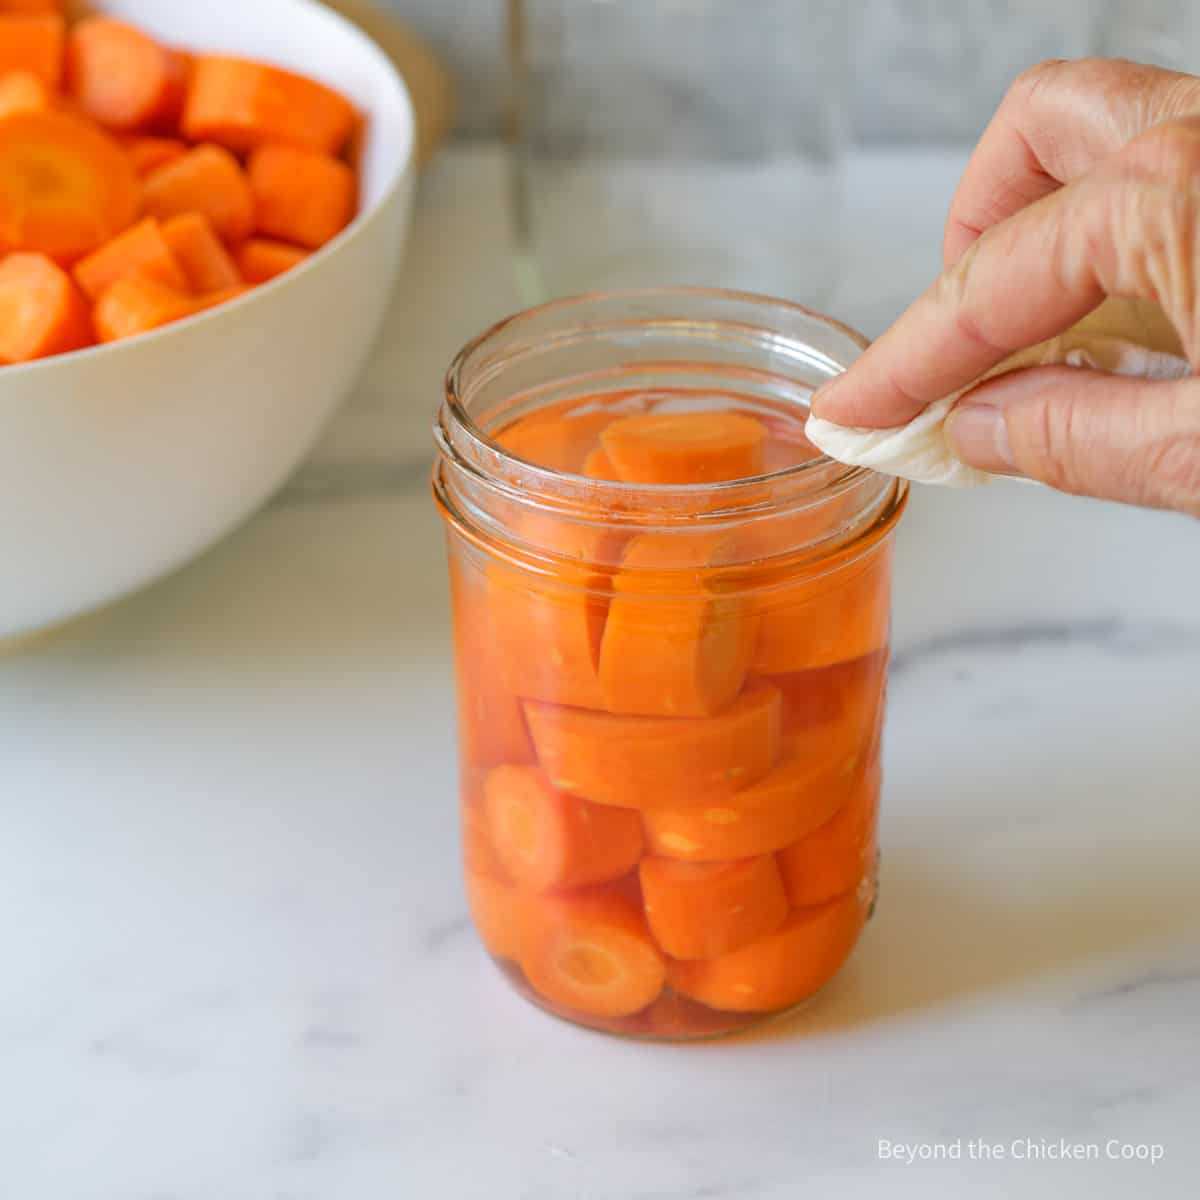 Wiping the rim of a canning jar.